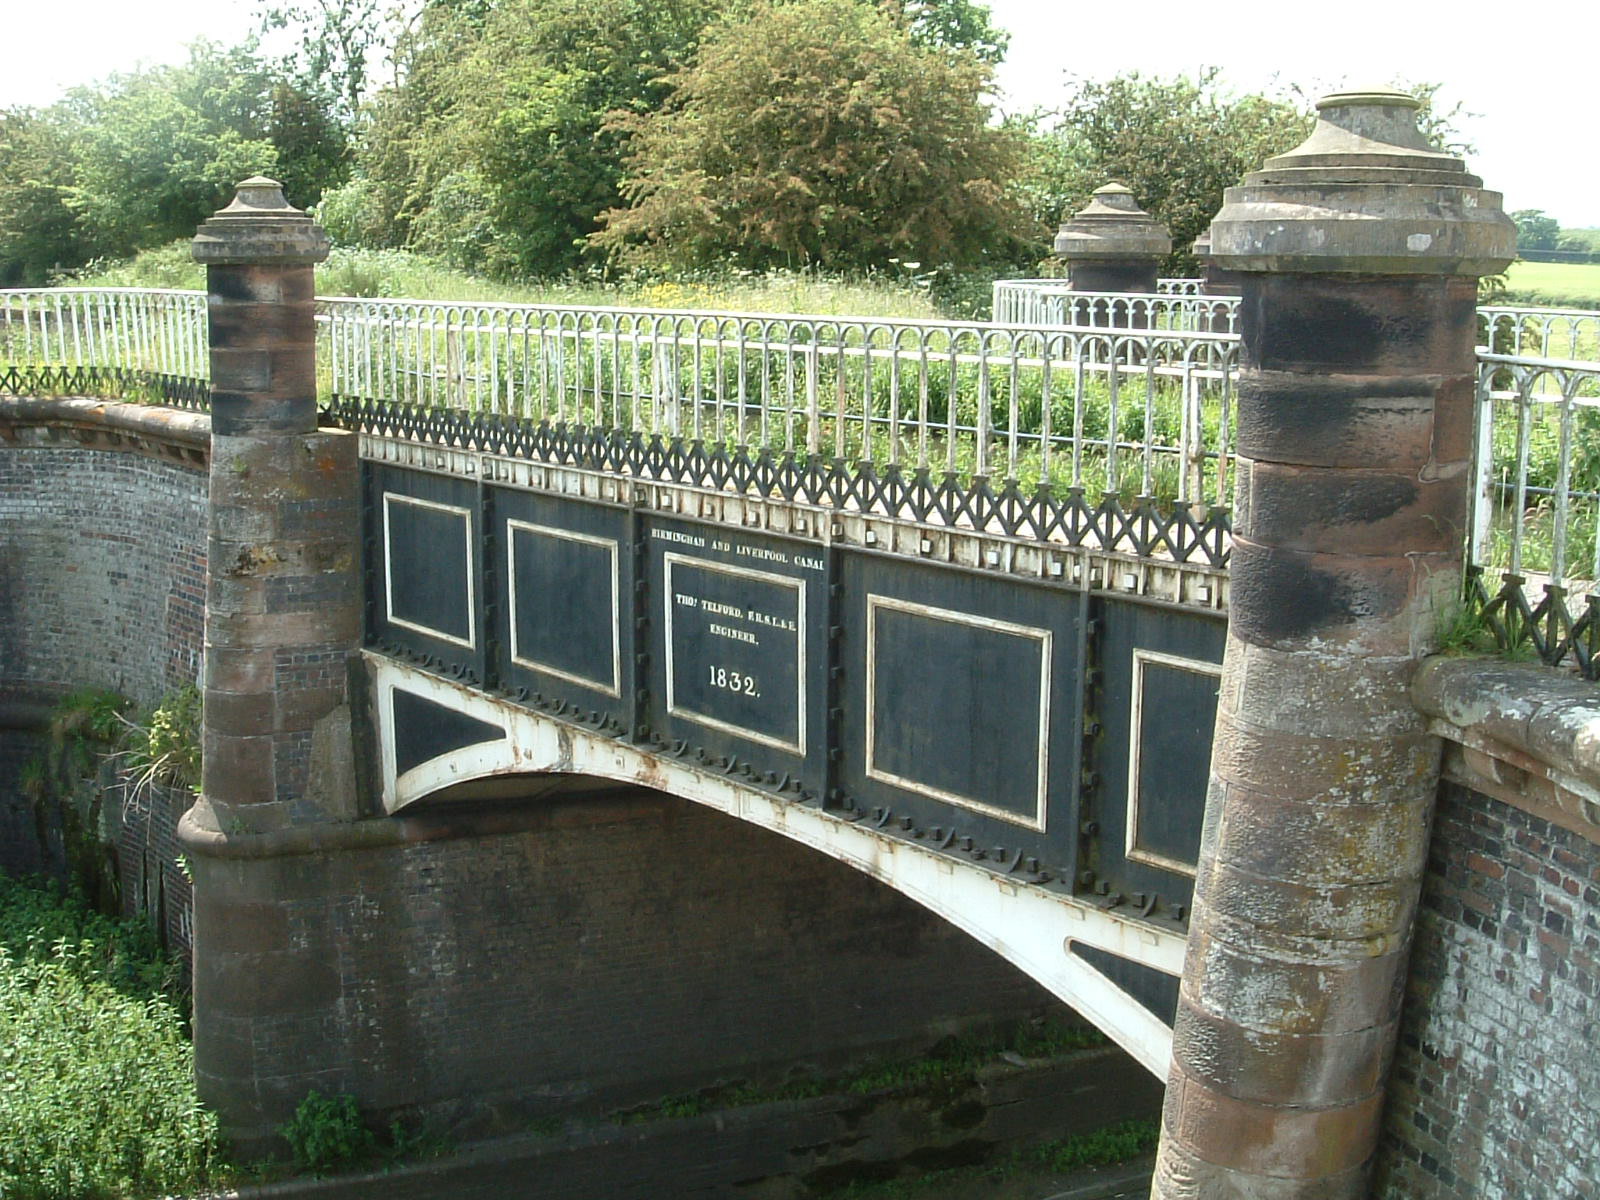 The aqueduct that passes over Watling Street